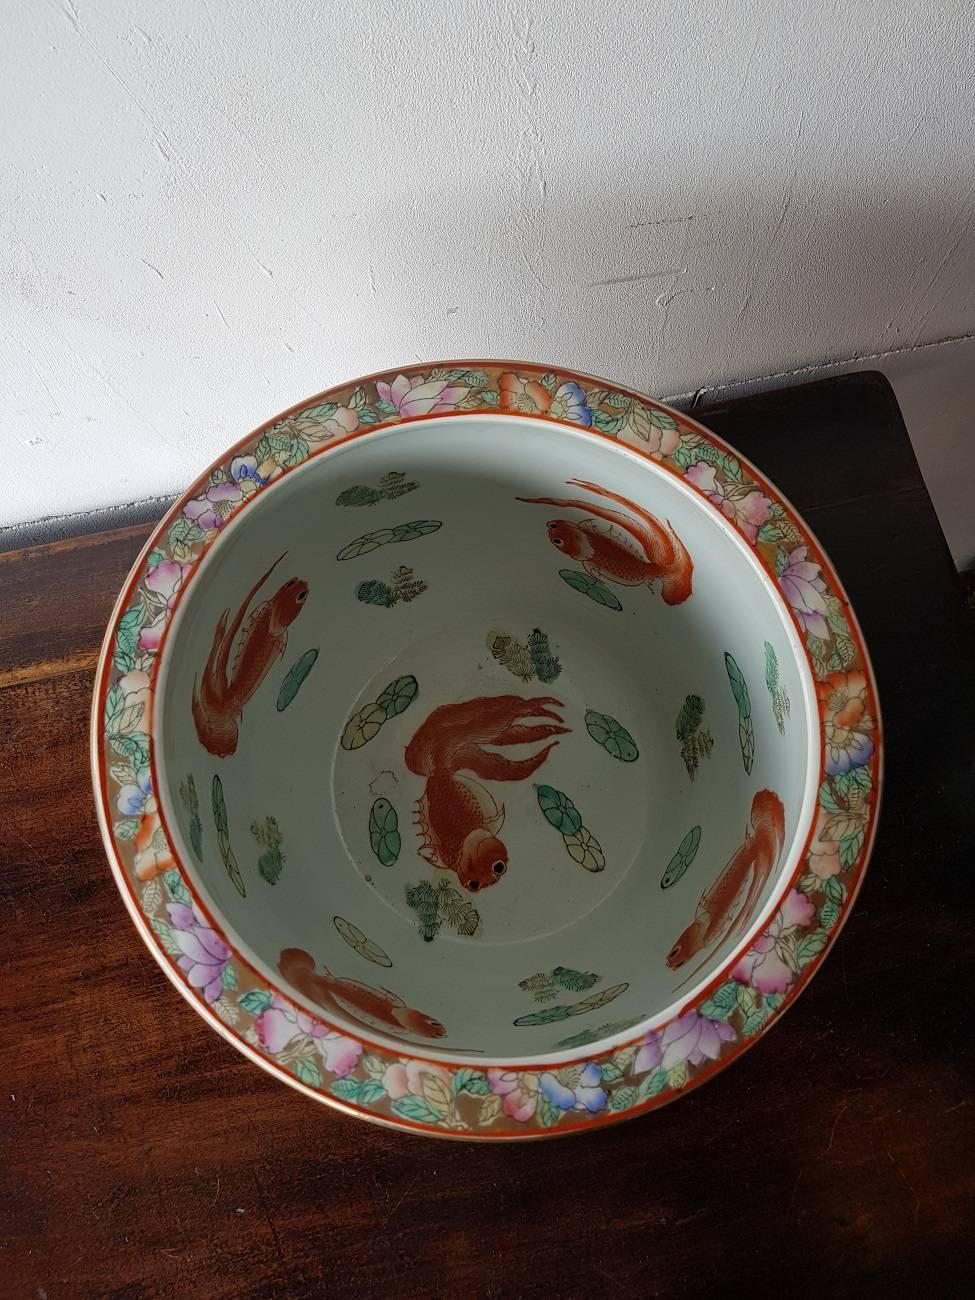 Fantastic and colorful Chinese porcelain fishbowl after a antique example with images of women and further in mint condition and made in the Second half of the 20th century.

The measurements are,
Depth 30.5 cm/ 12 inch.
Width 30.5 cm/ 12